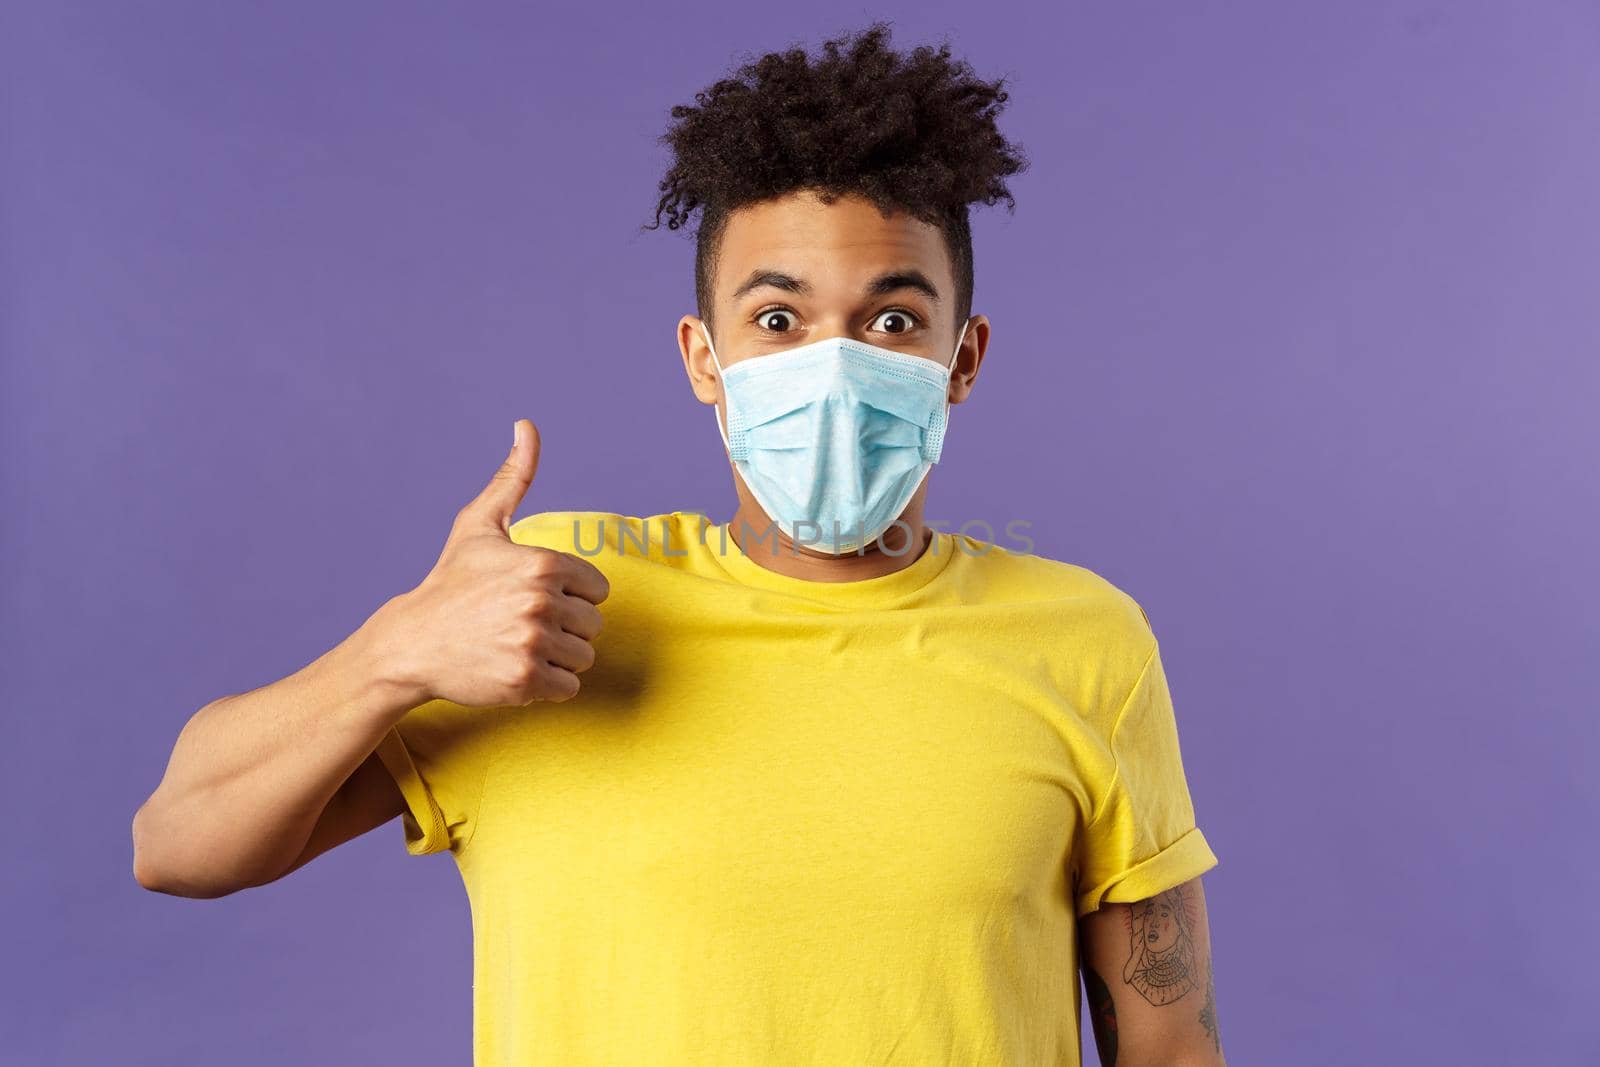 Covid19, healtcare and medicine concept. Excited young hispanic man in facial mask taking care of health, avoid public places, stay home and encourage be safe indoors, show thumbs-up, smiling.